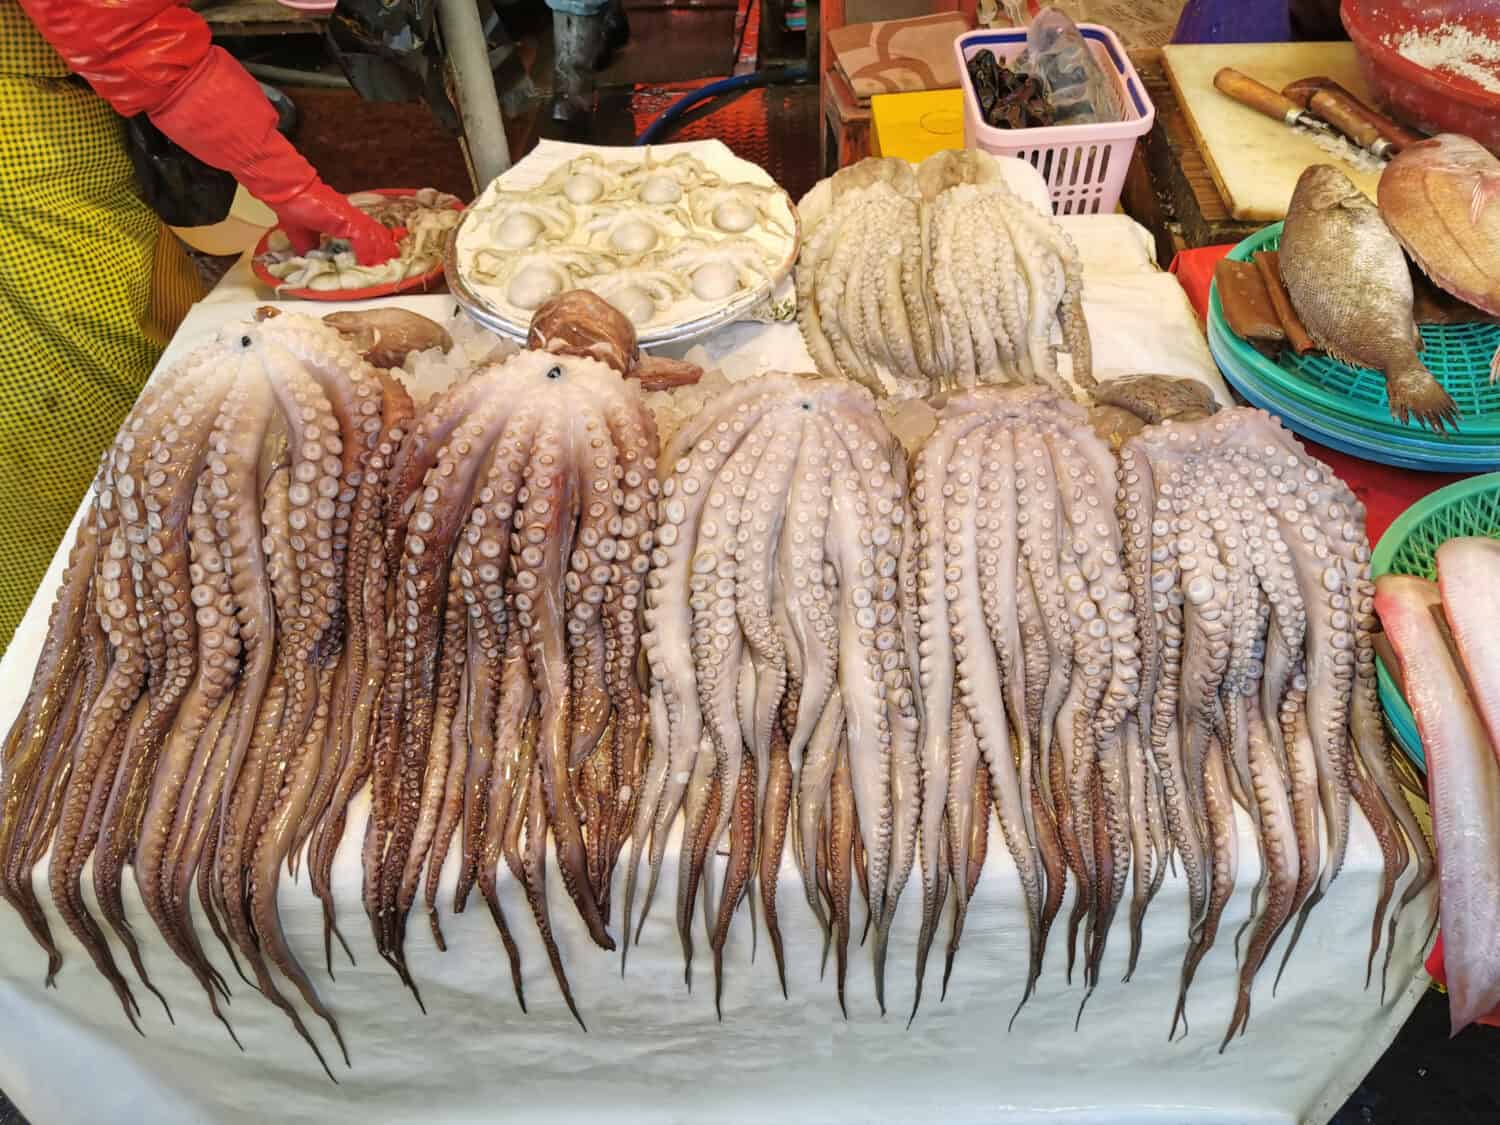 San-nakji is a variety of raw dish made with long arm octopus (Octopus minor), a small octopus species called nakji in Korean and is sometimes translated into "baby octopus".